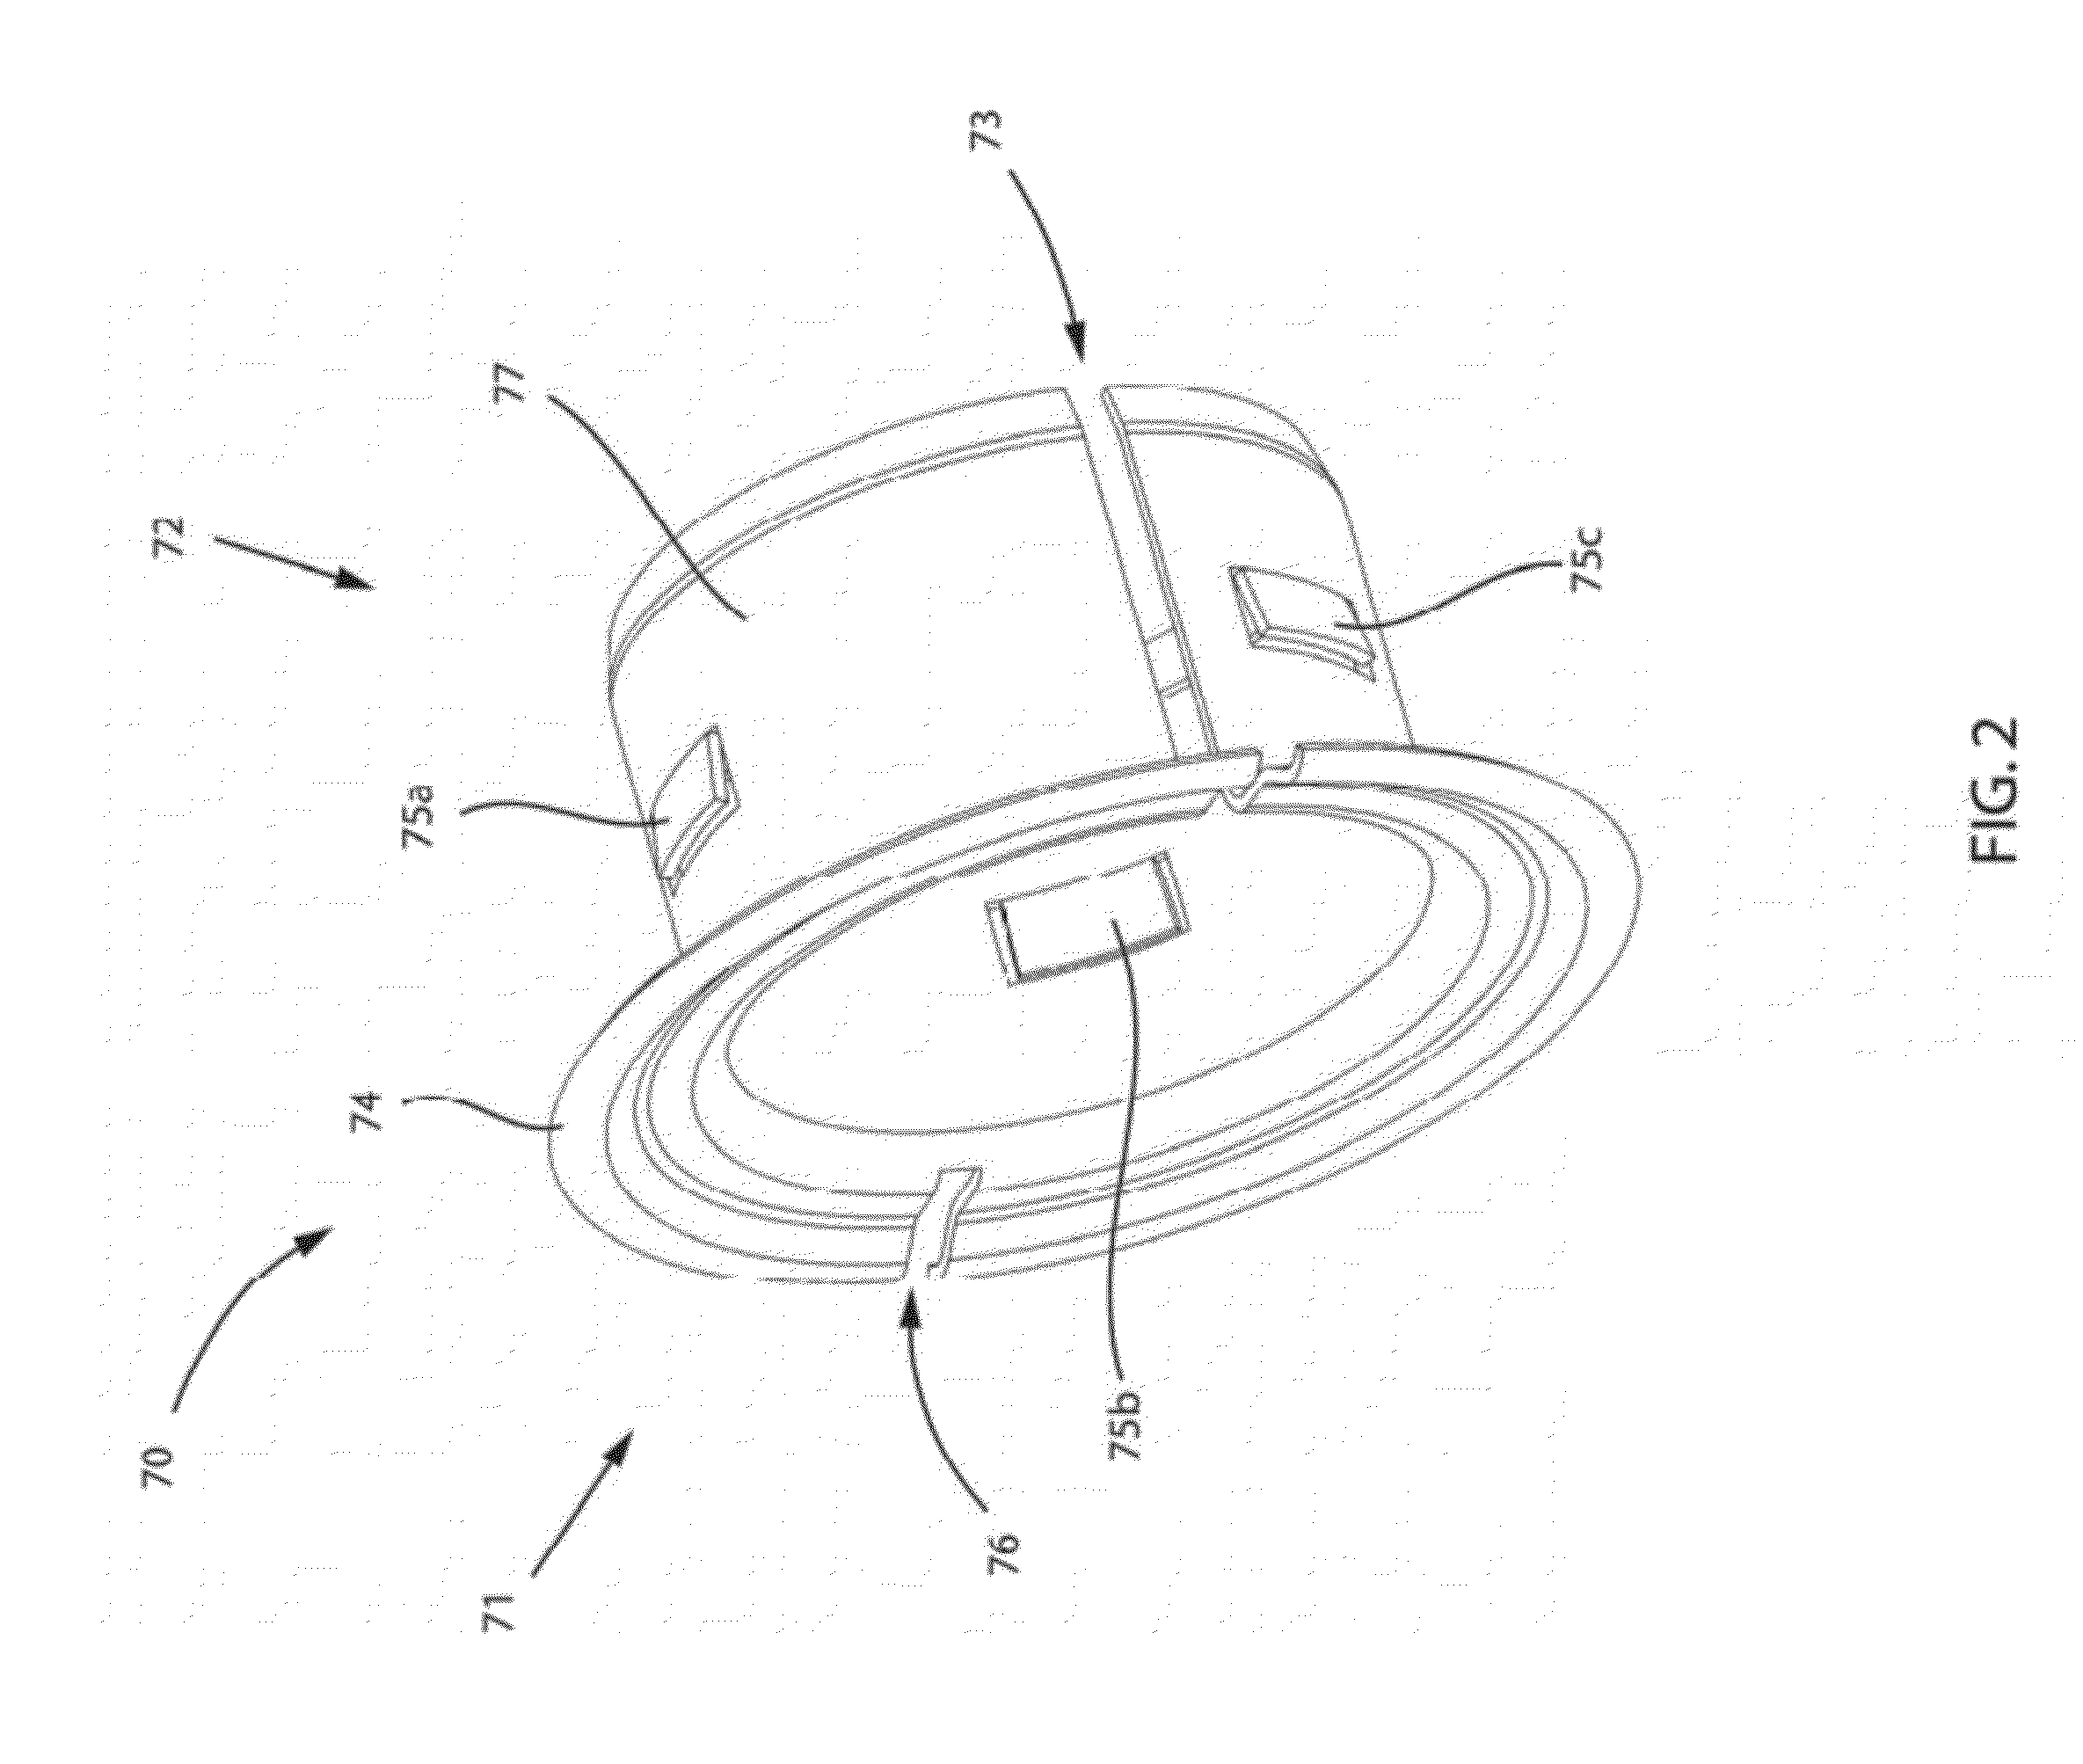 Coaxial cable connector having electrical continuity member